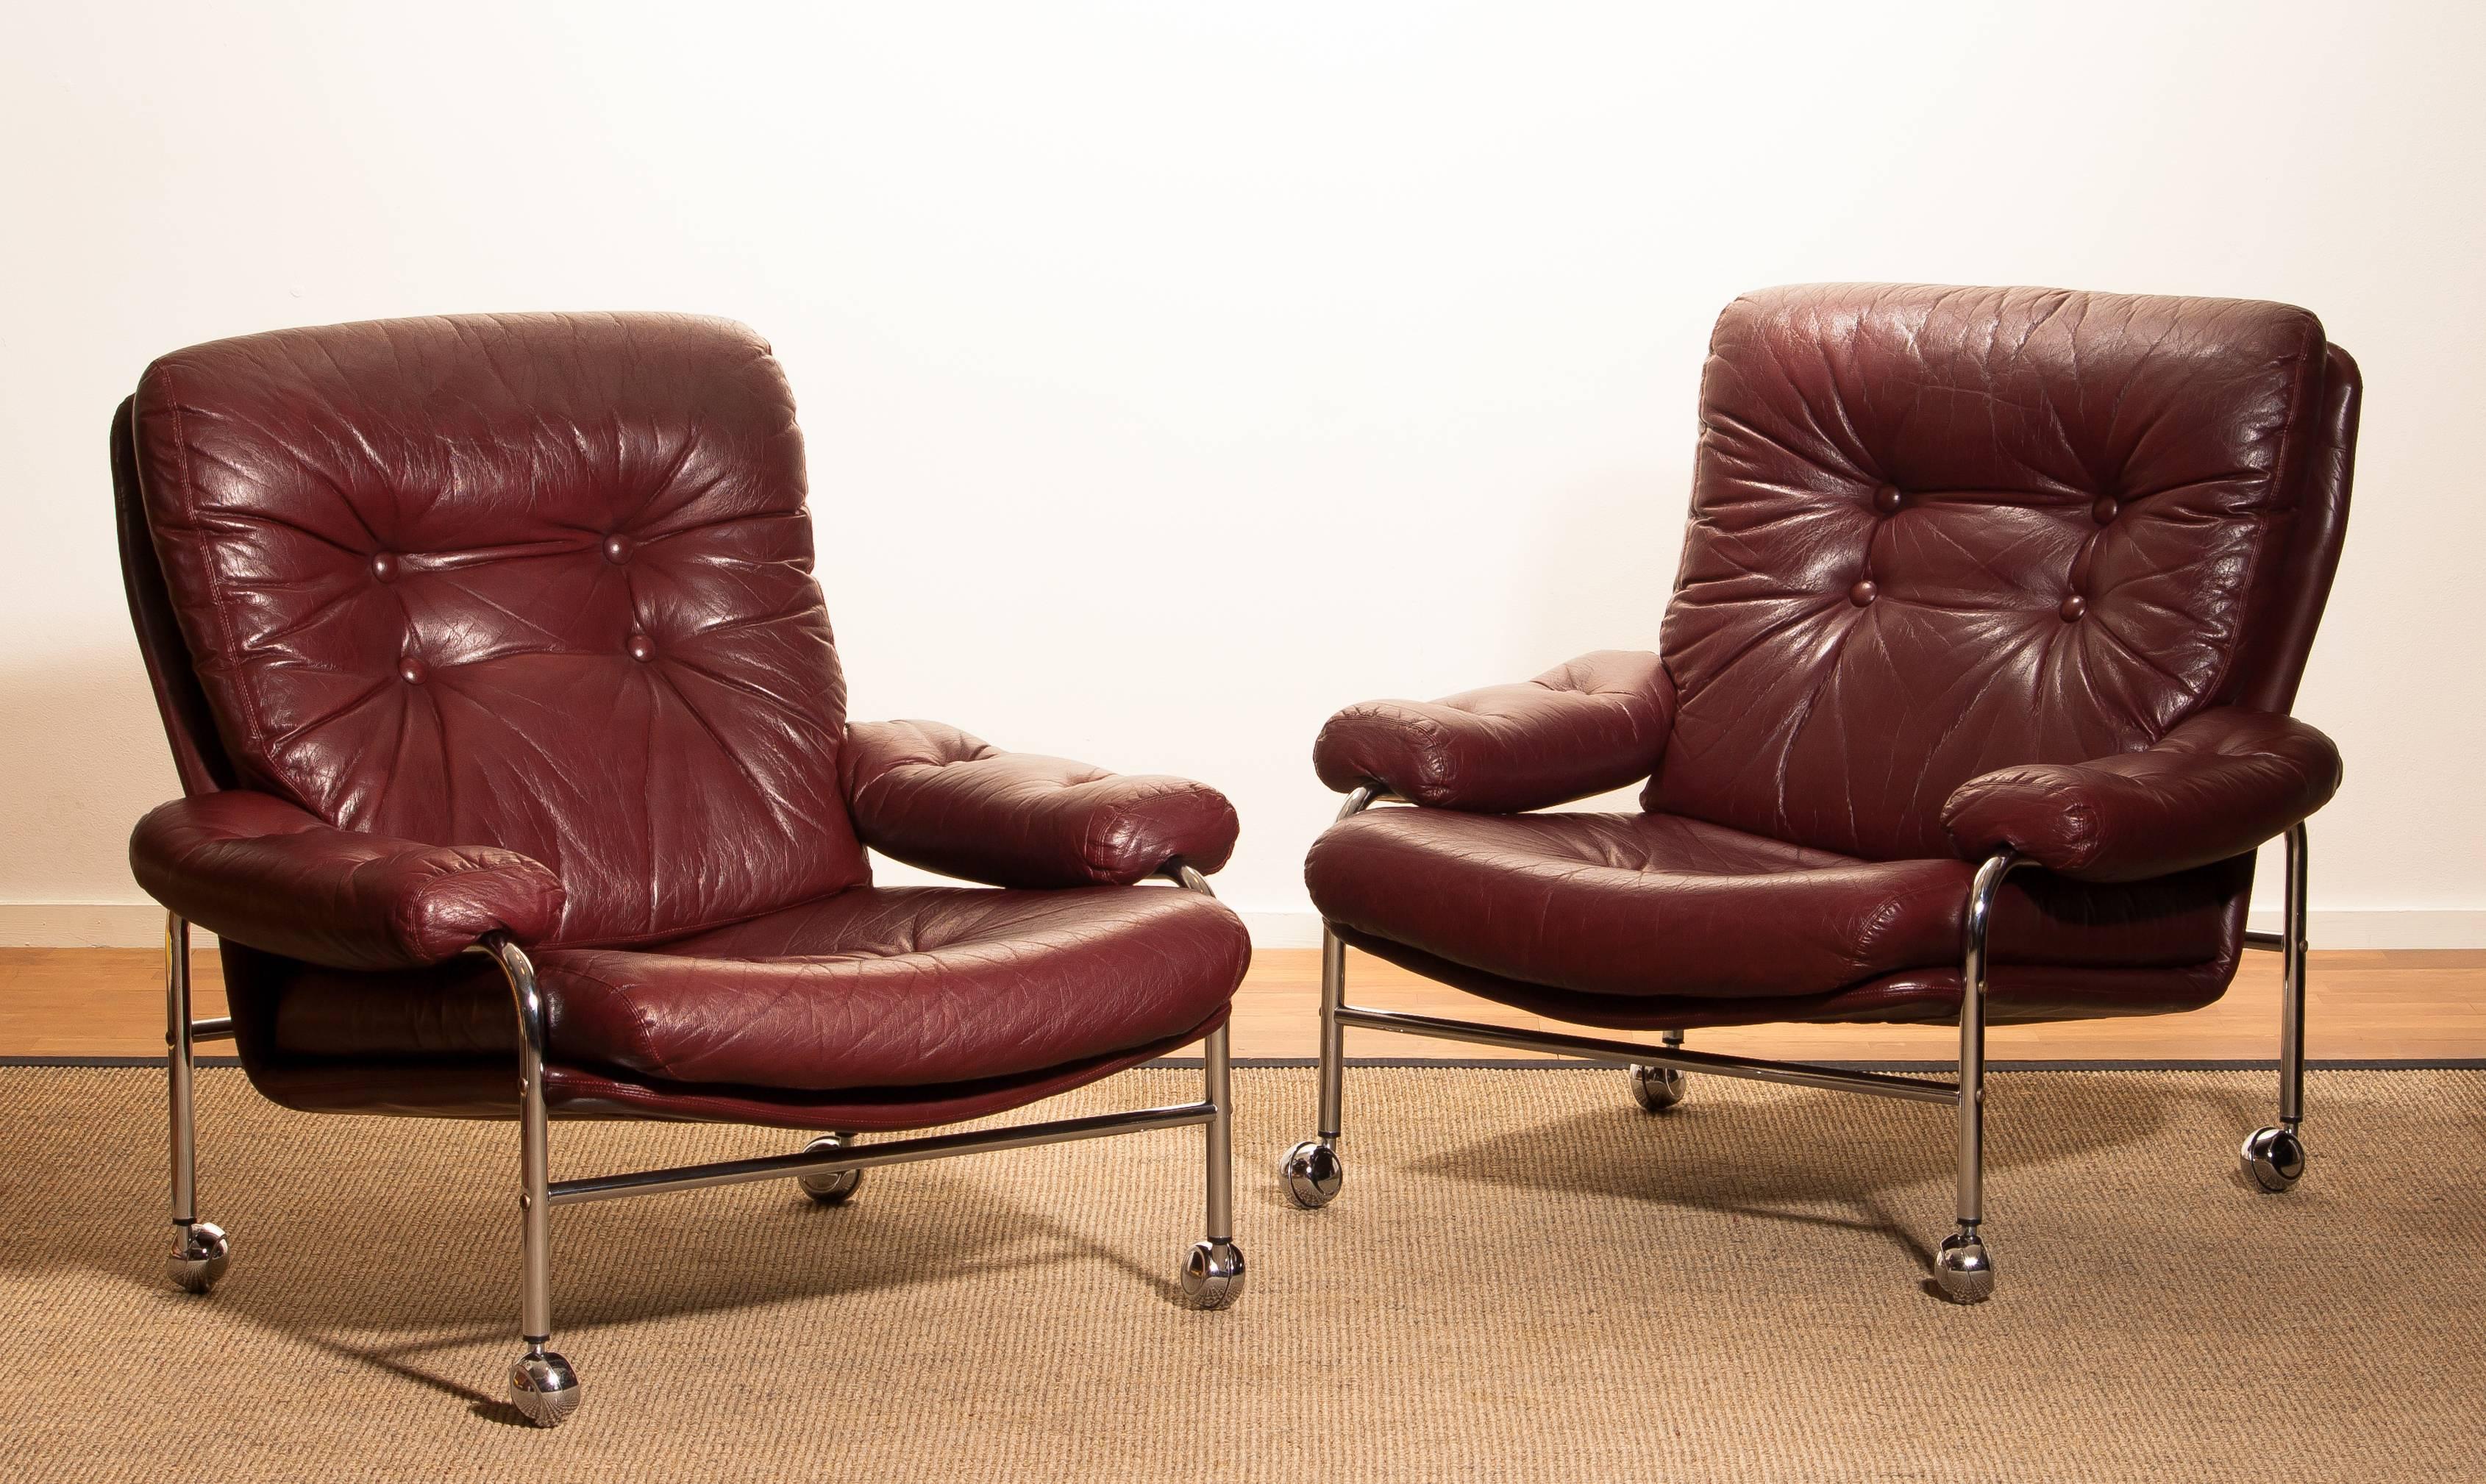 Beautiful set of two extremely comfortable easy or lounge chairs made by Scapa Rydaholm, Sweden.
These, typical Scandinavian chairs are upholstered with oxen red leather based on a chromed metal frame.
All in perfect condition.

Period 1970s